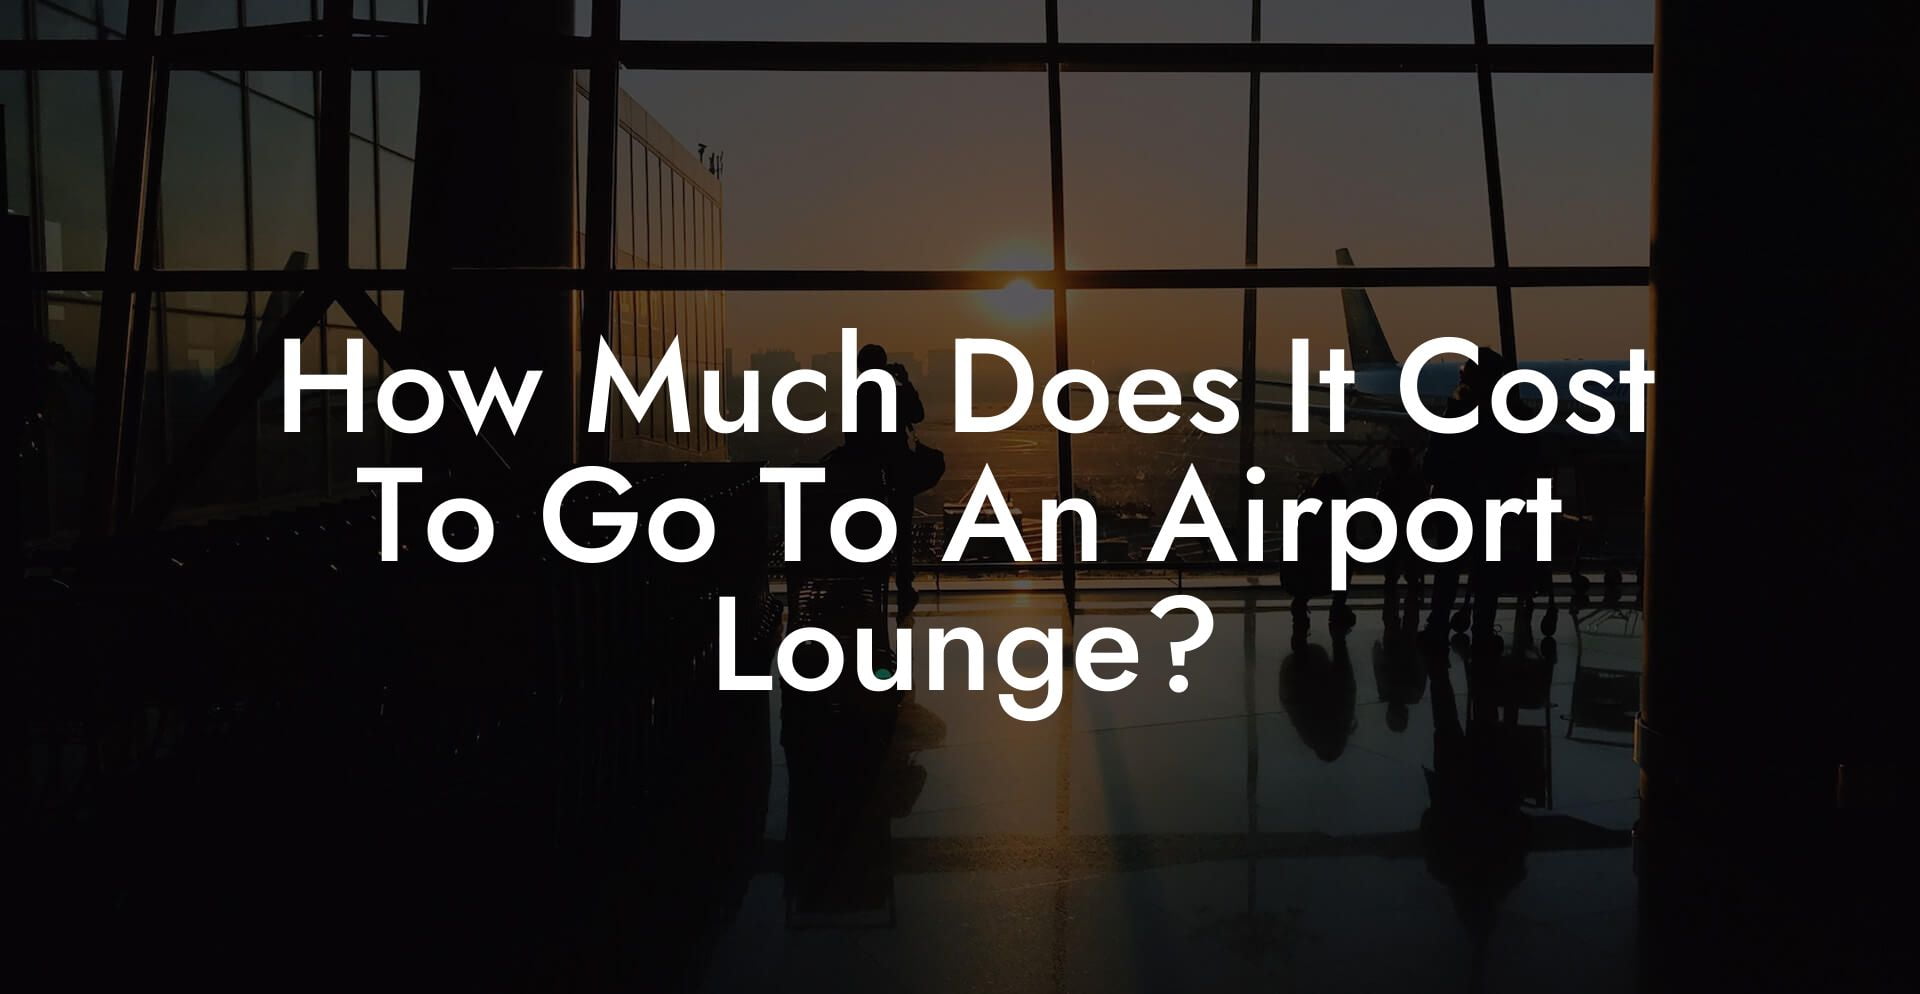 How Much Does It Cost To Go To An Airport Lounge?